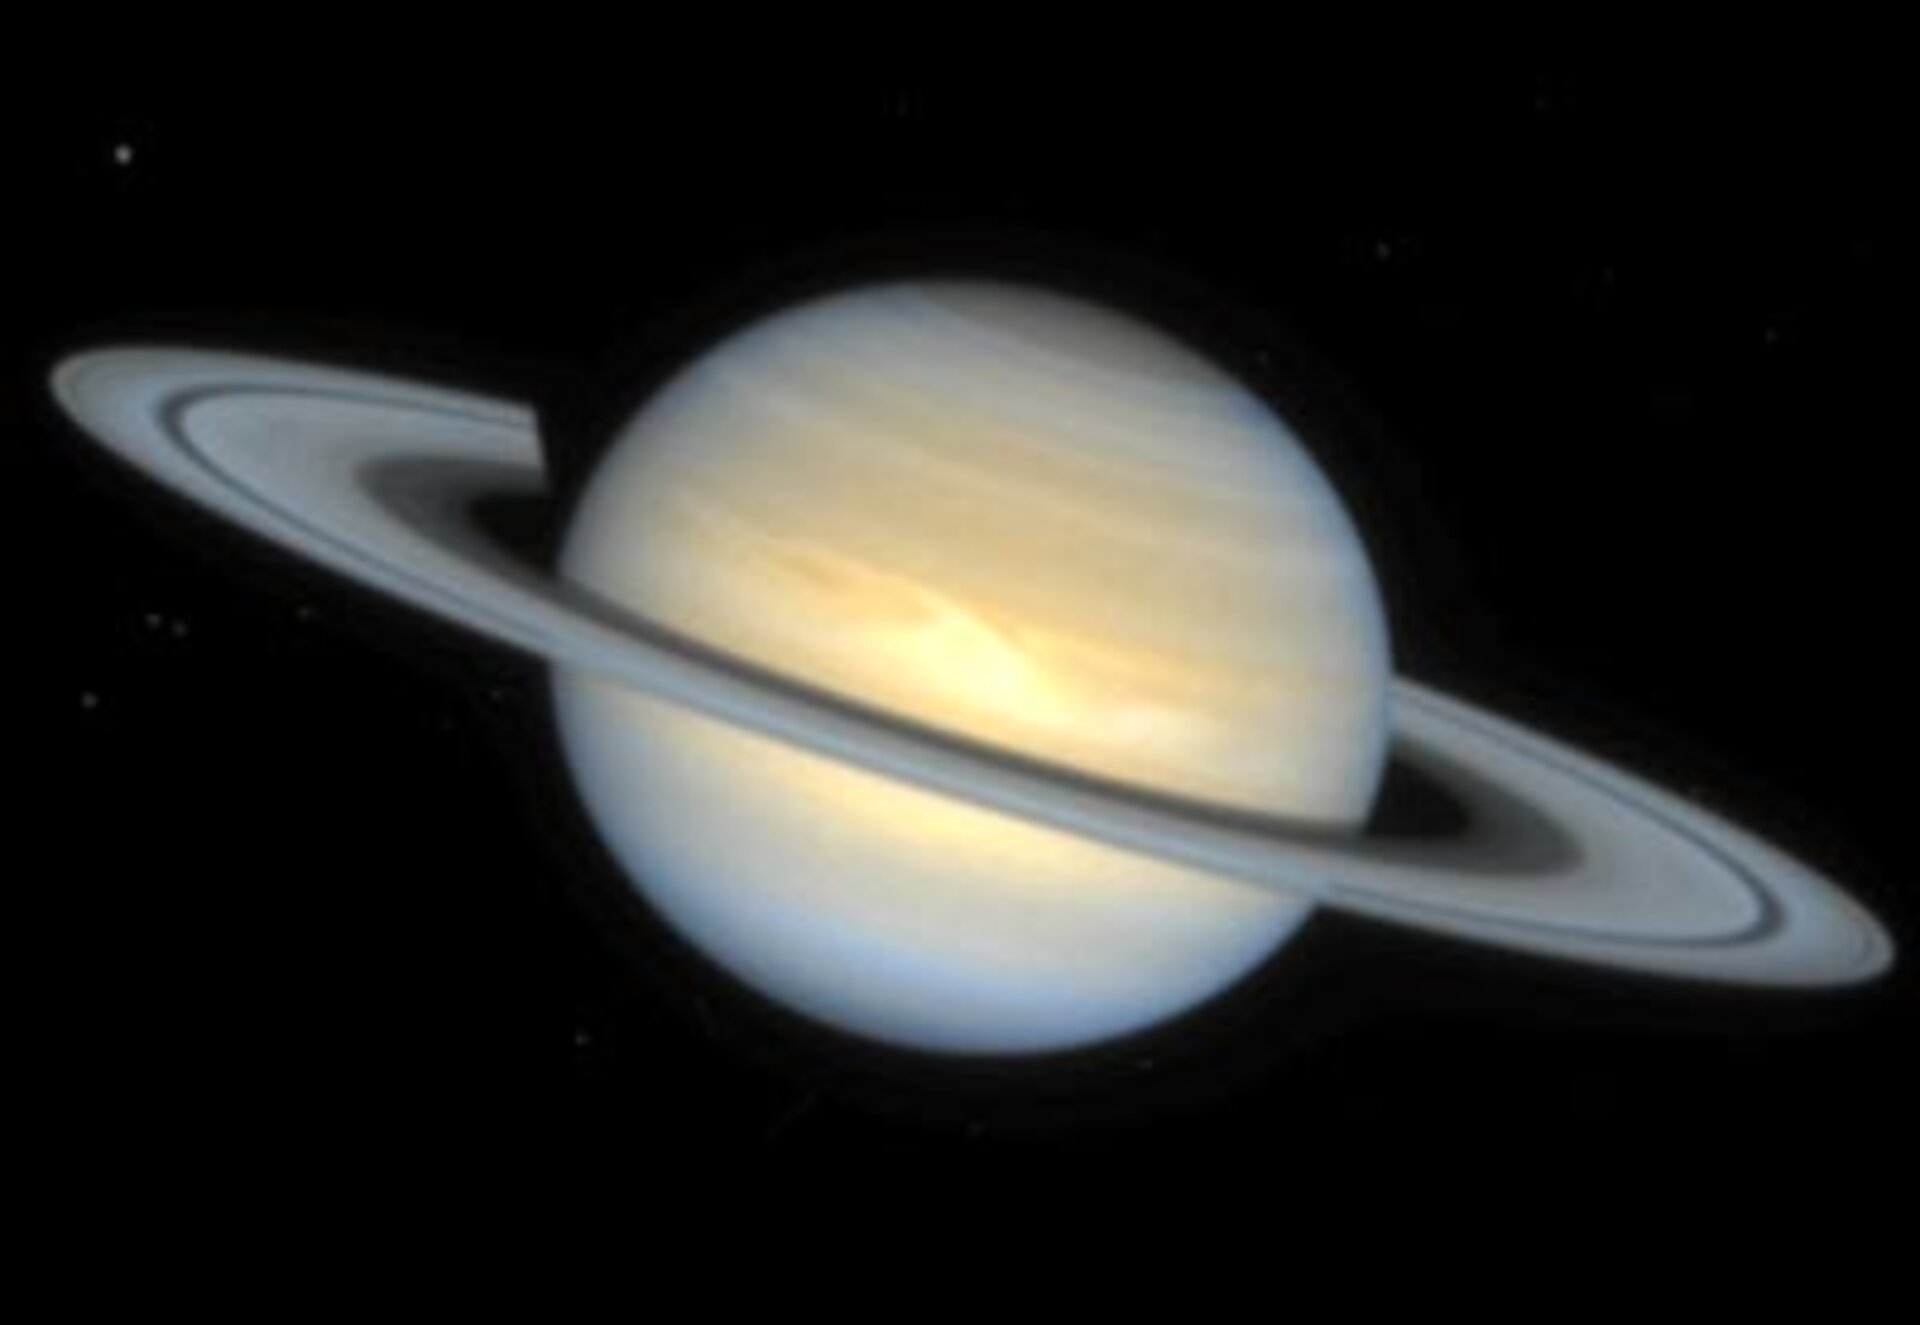 A closer look at the rings of Saturn - Skywatching - Castanet.net